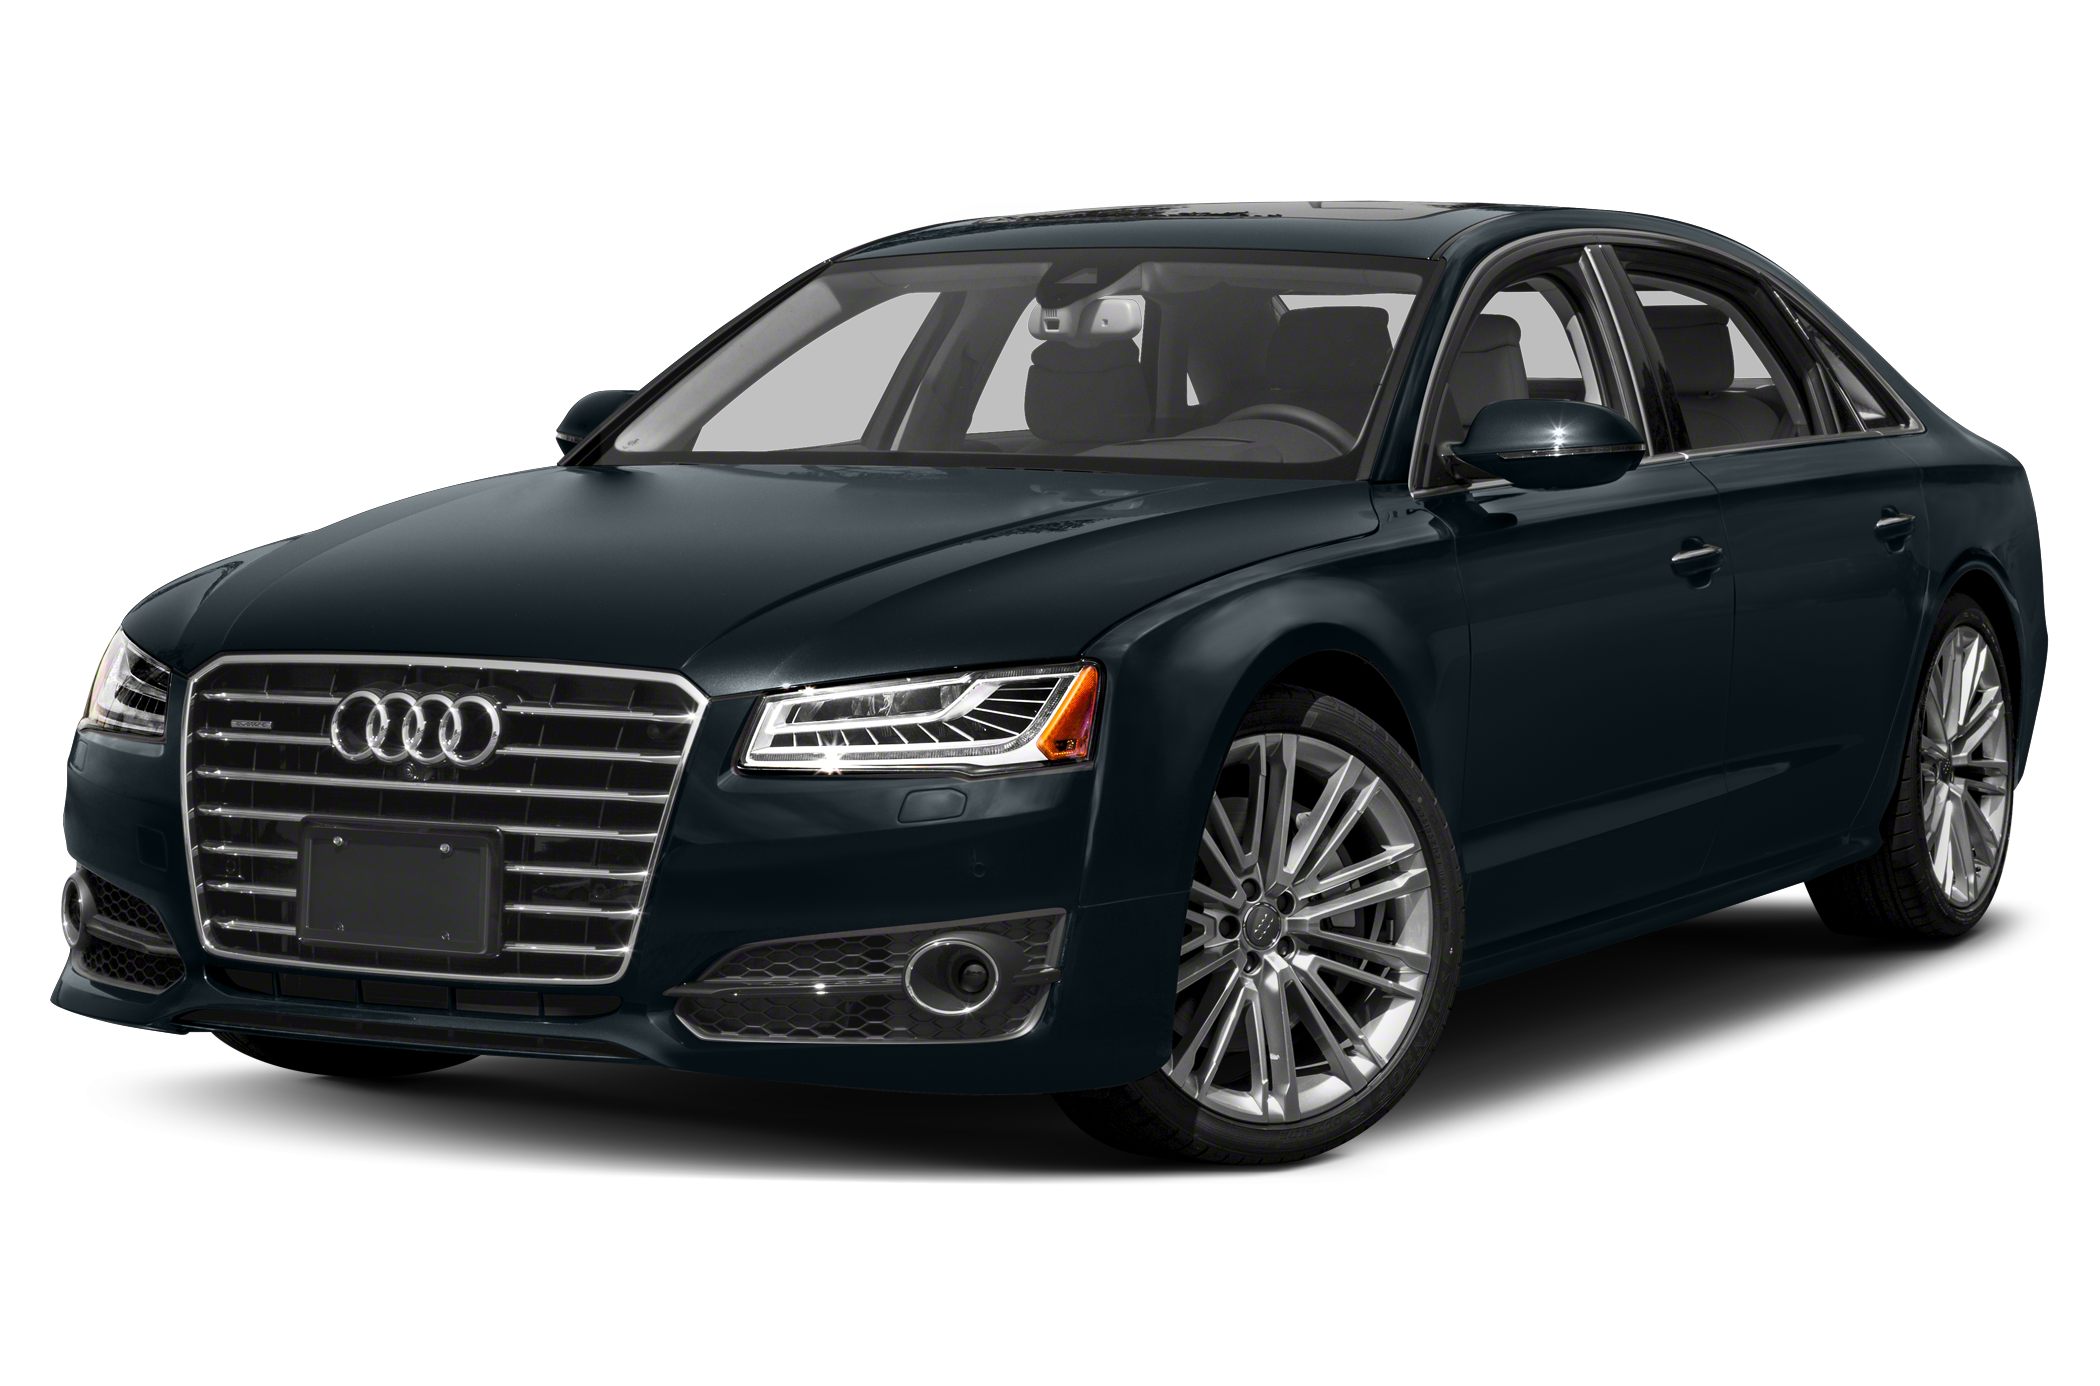 17 Audi A8 Pictures